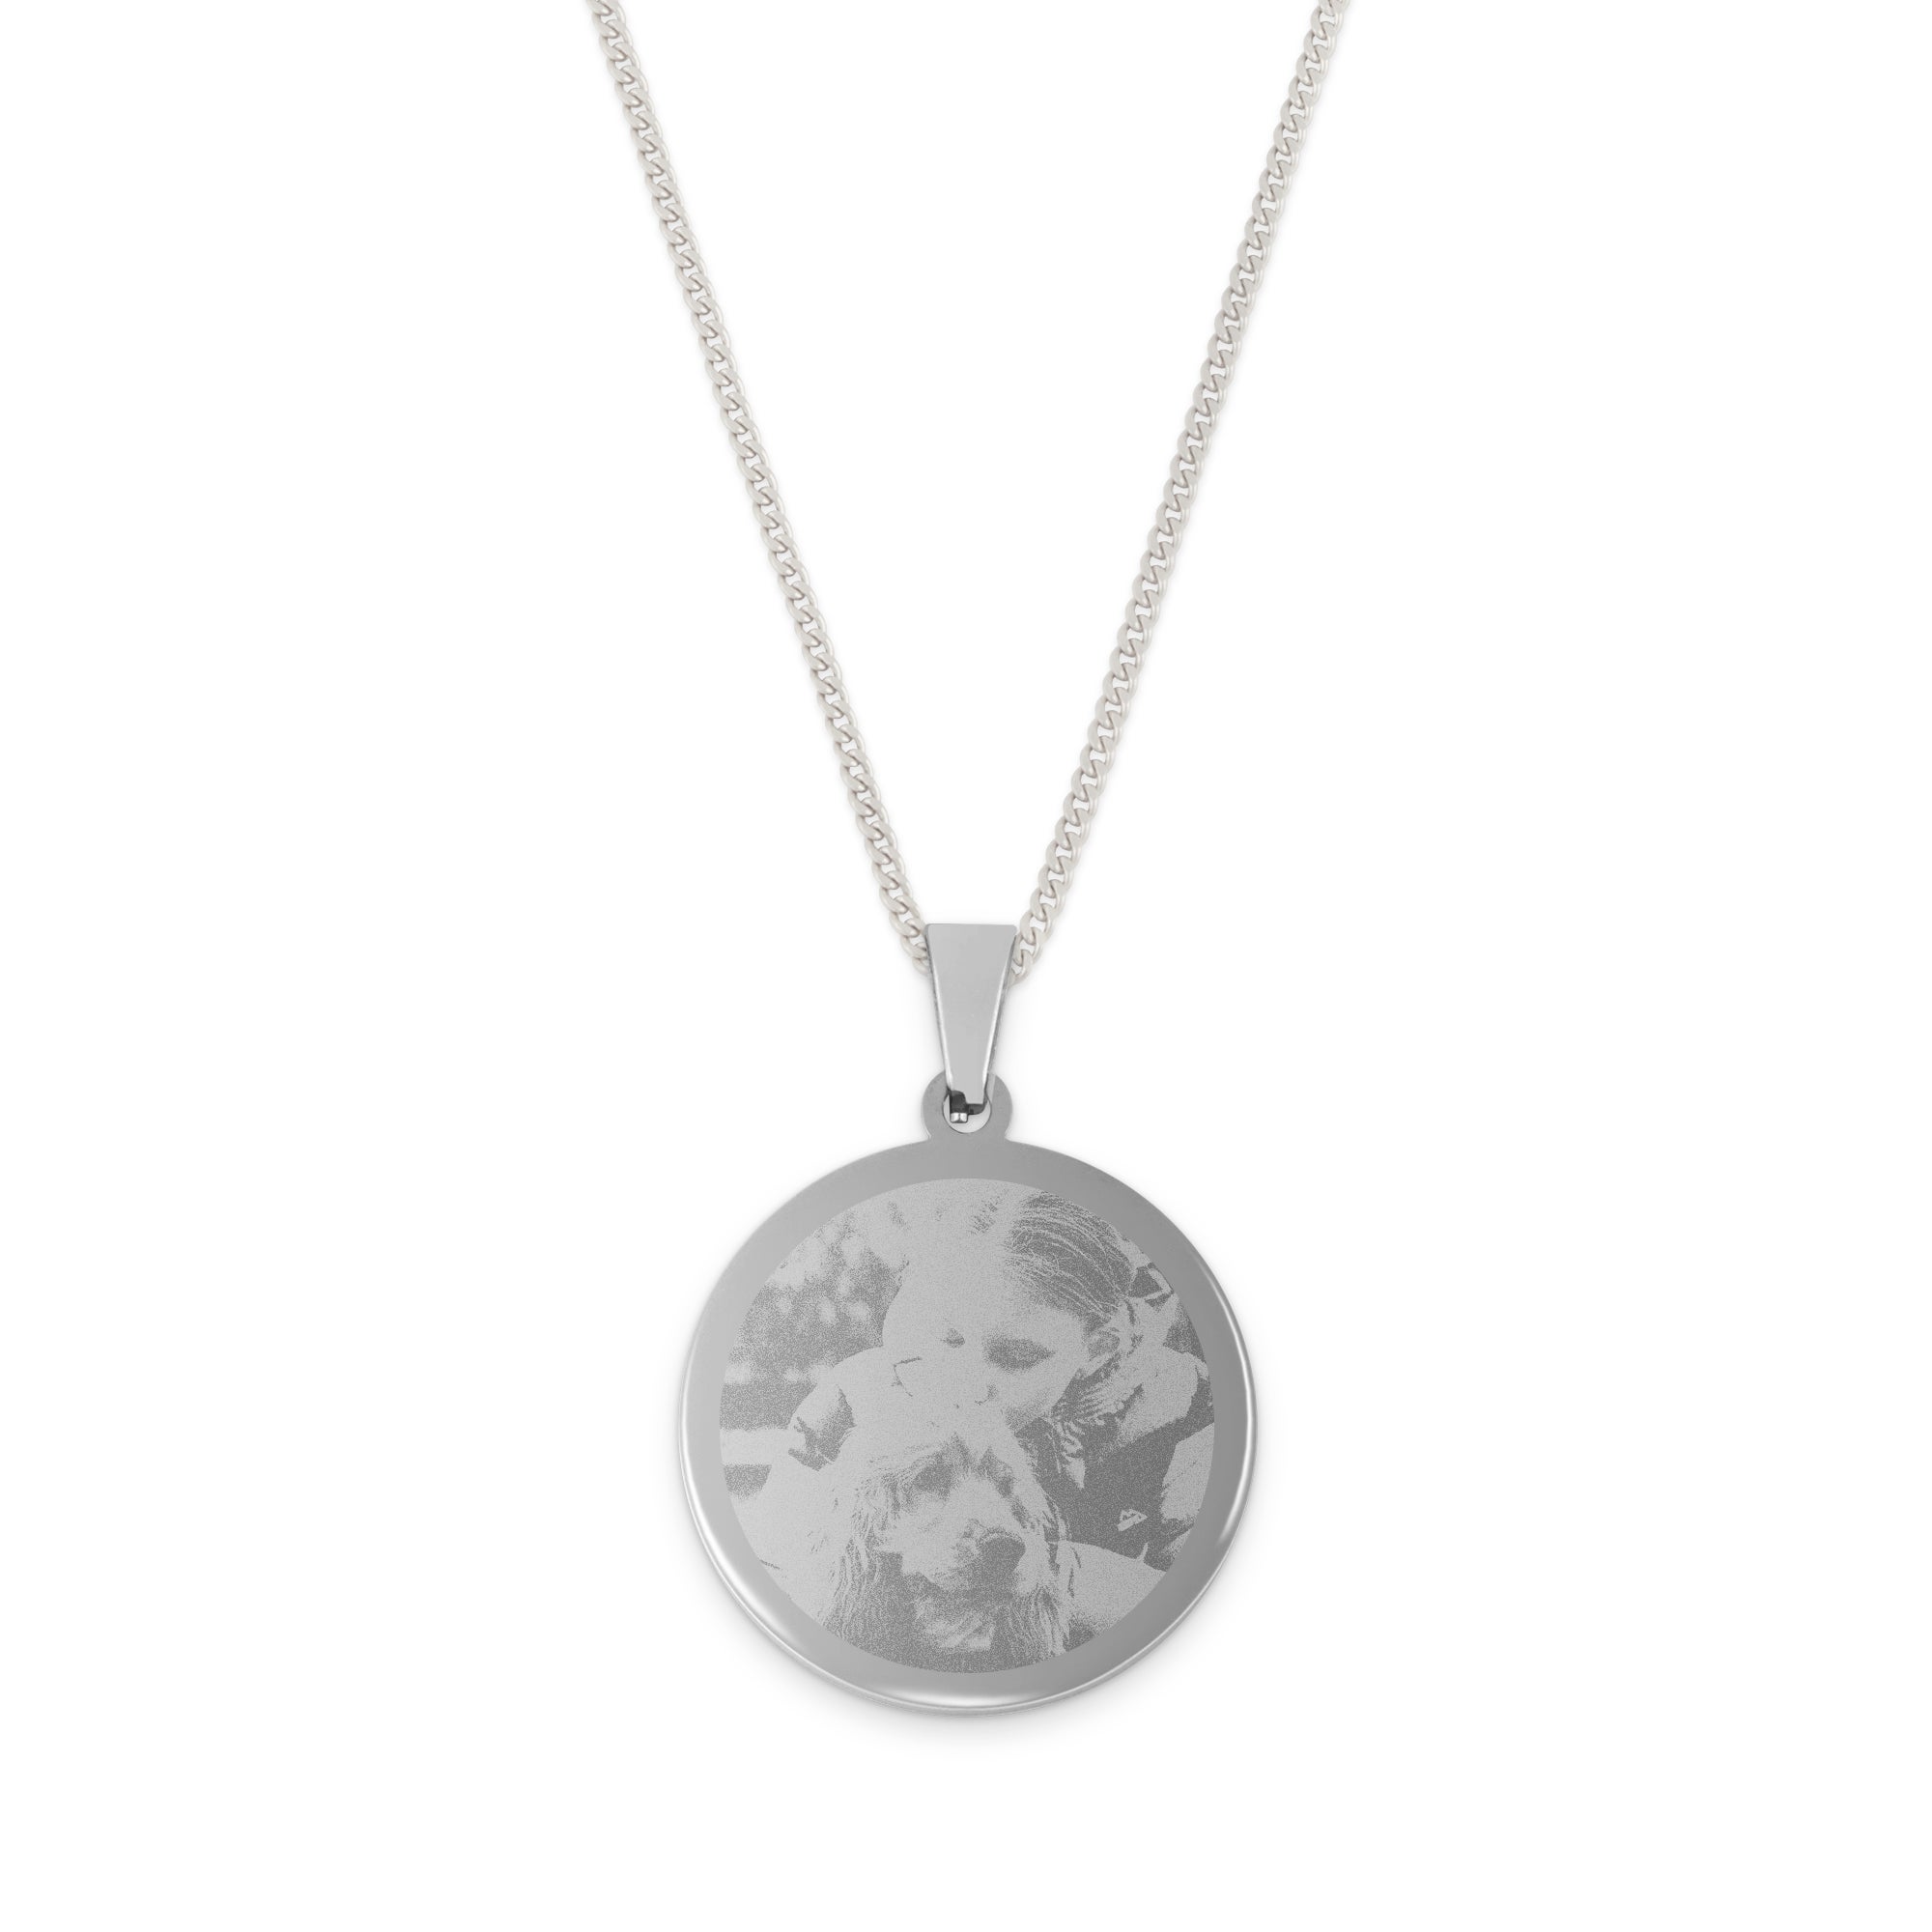 Necklace round pendant with photo - Silver